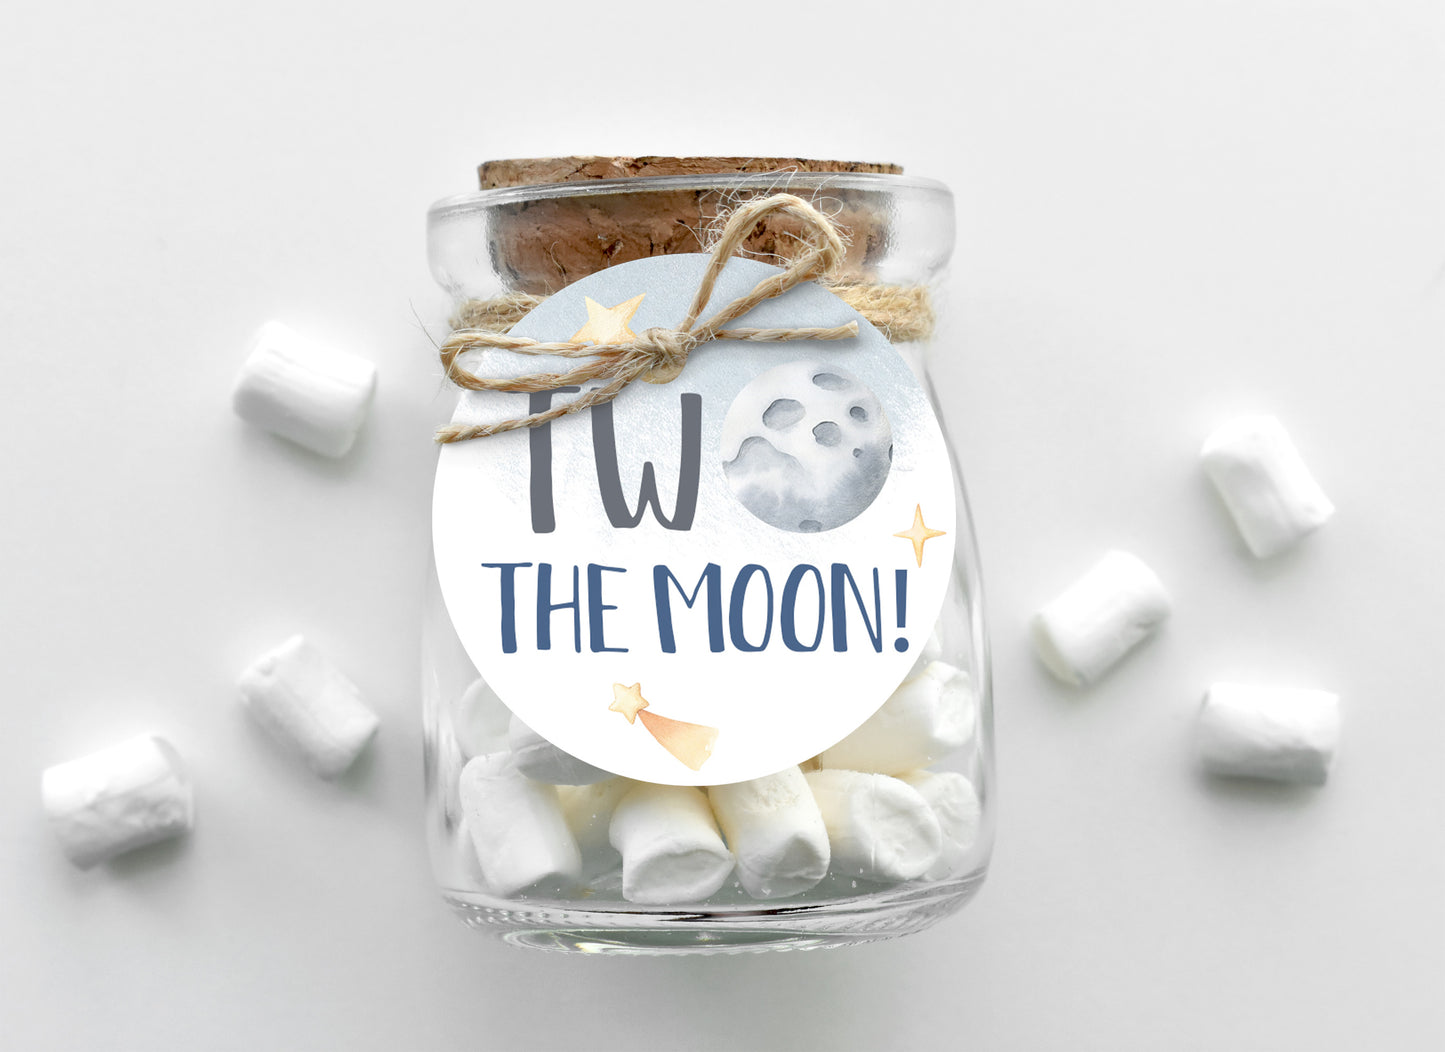 Two The Moon Cupcake Toppers | Space Themed 2nd Birthday Party Decorations - 39B